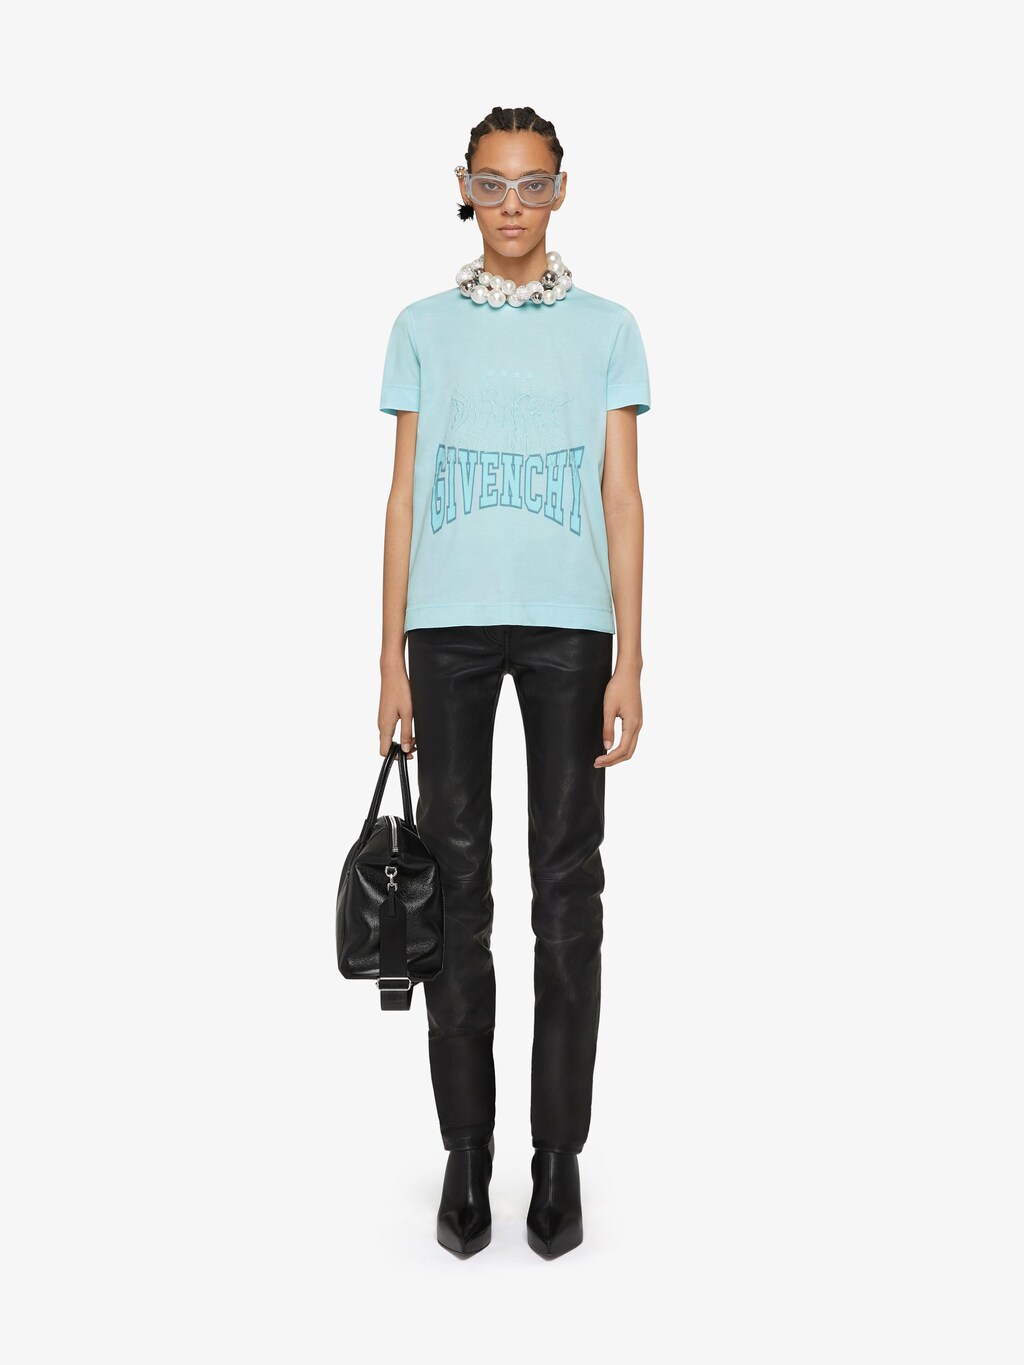 givenchy.com | Slim fit t-shirt in embroidered jersey